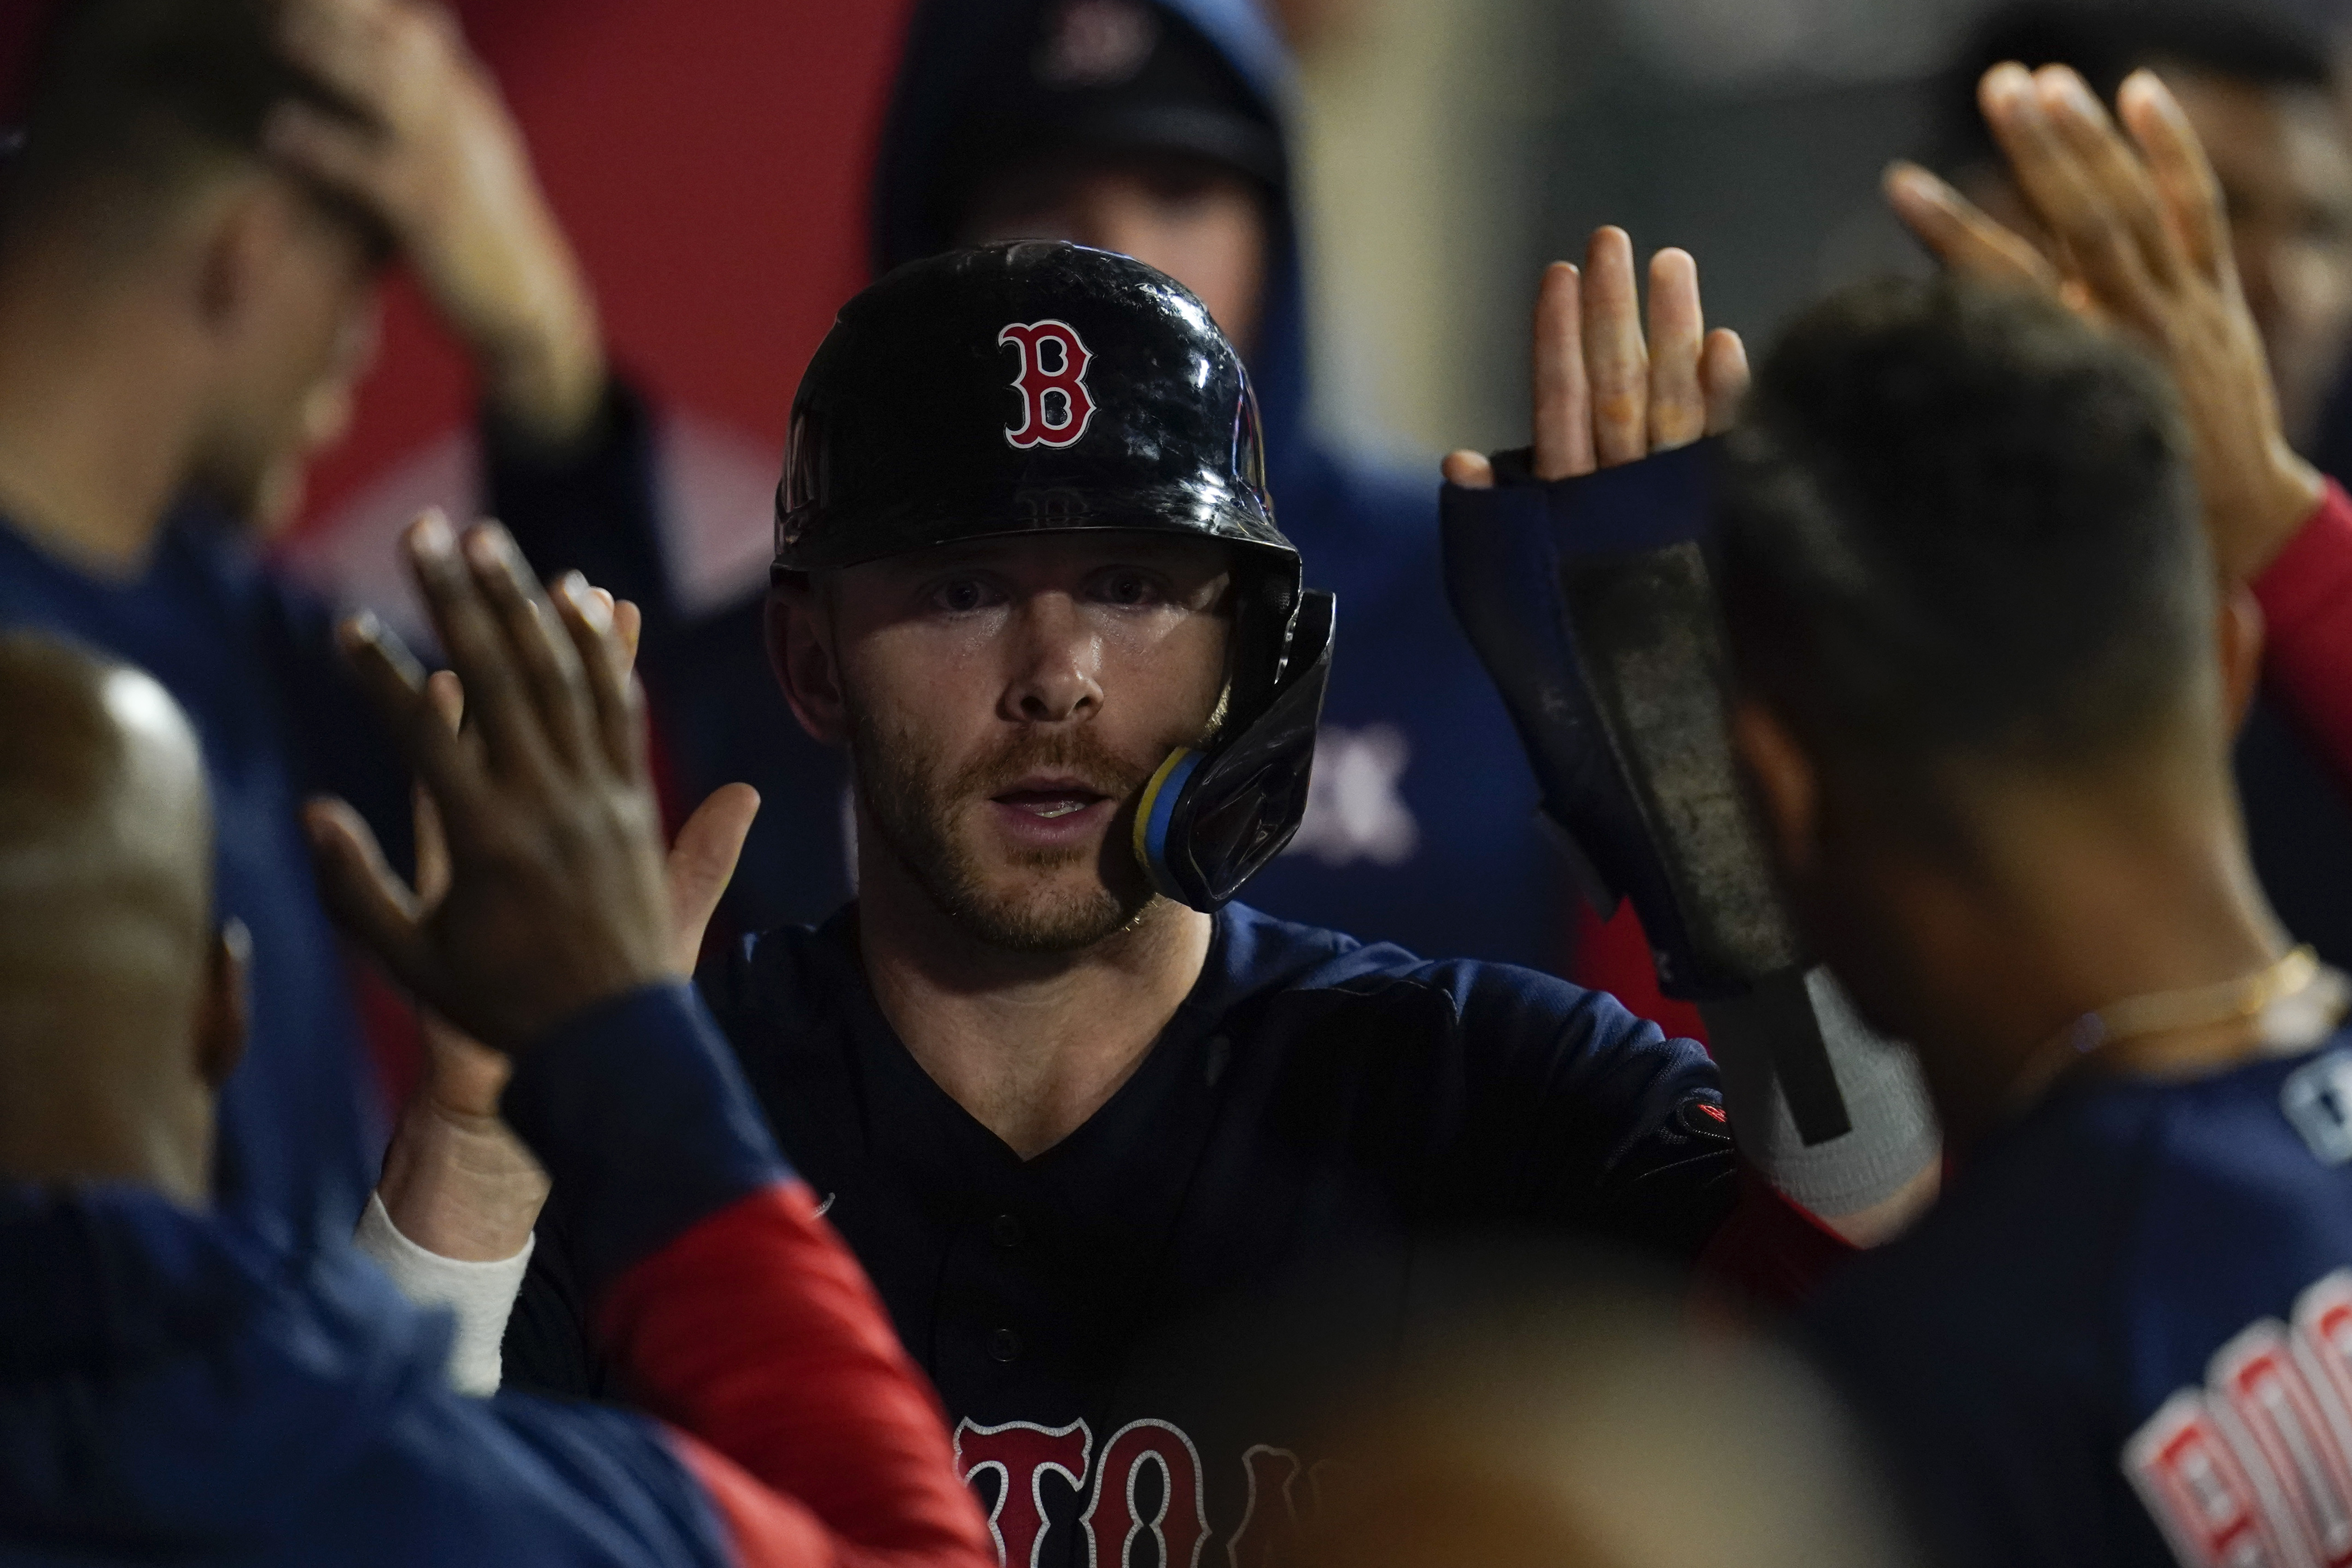 Here's Boston Fans' First Look At Trevor Story In Red Sox Uniform